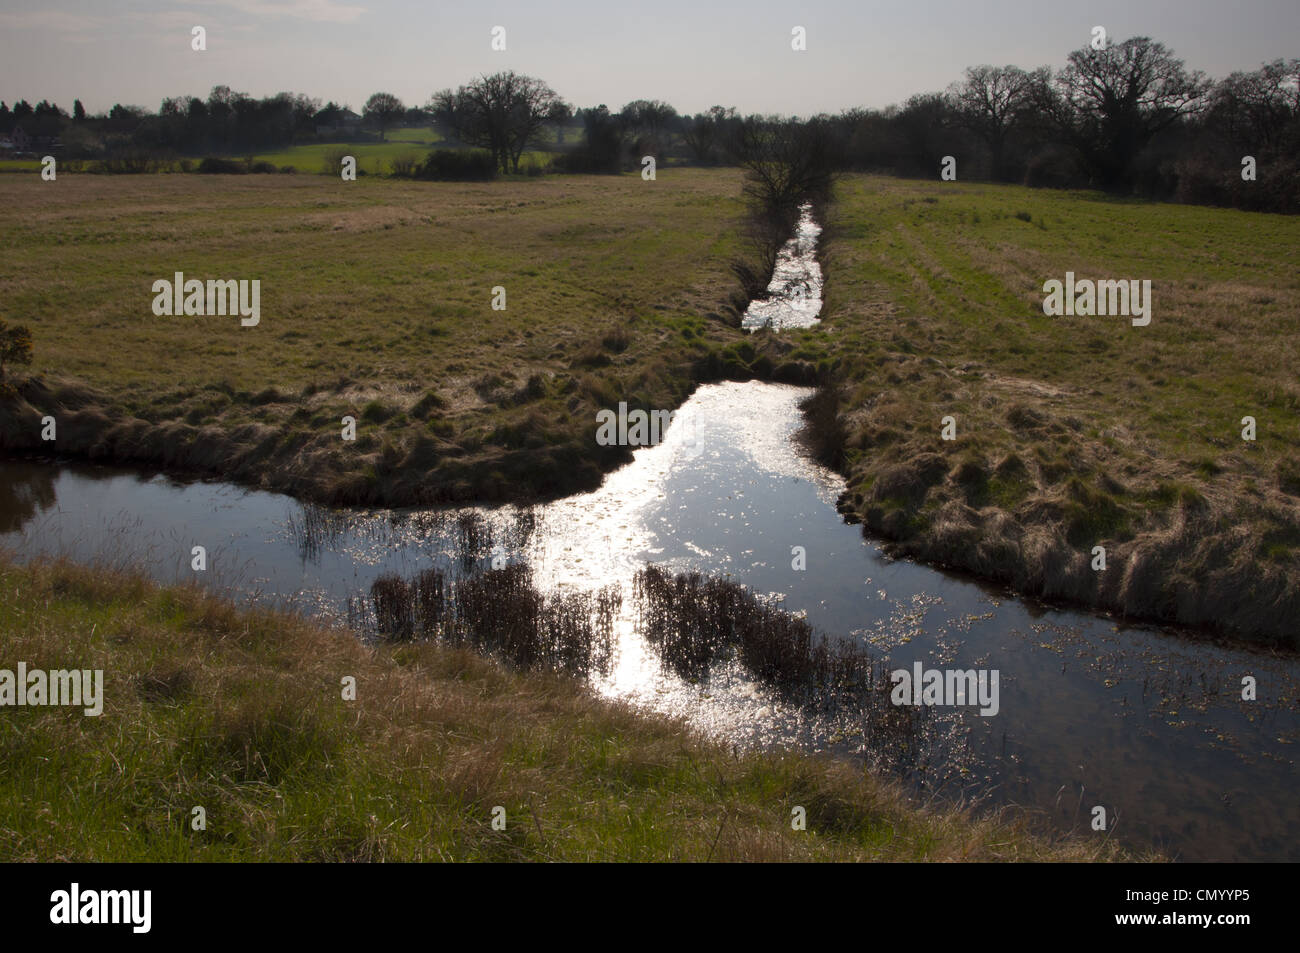 rural drainage ditch in agricultural field Stock Photo